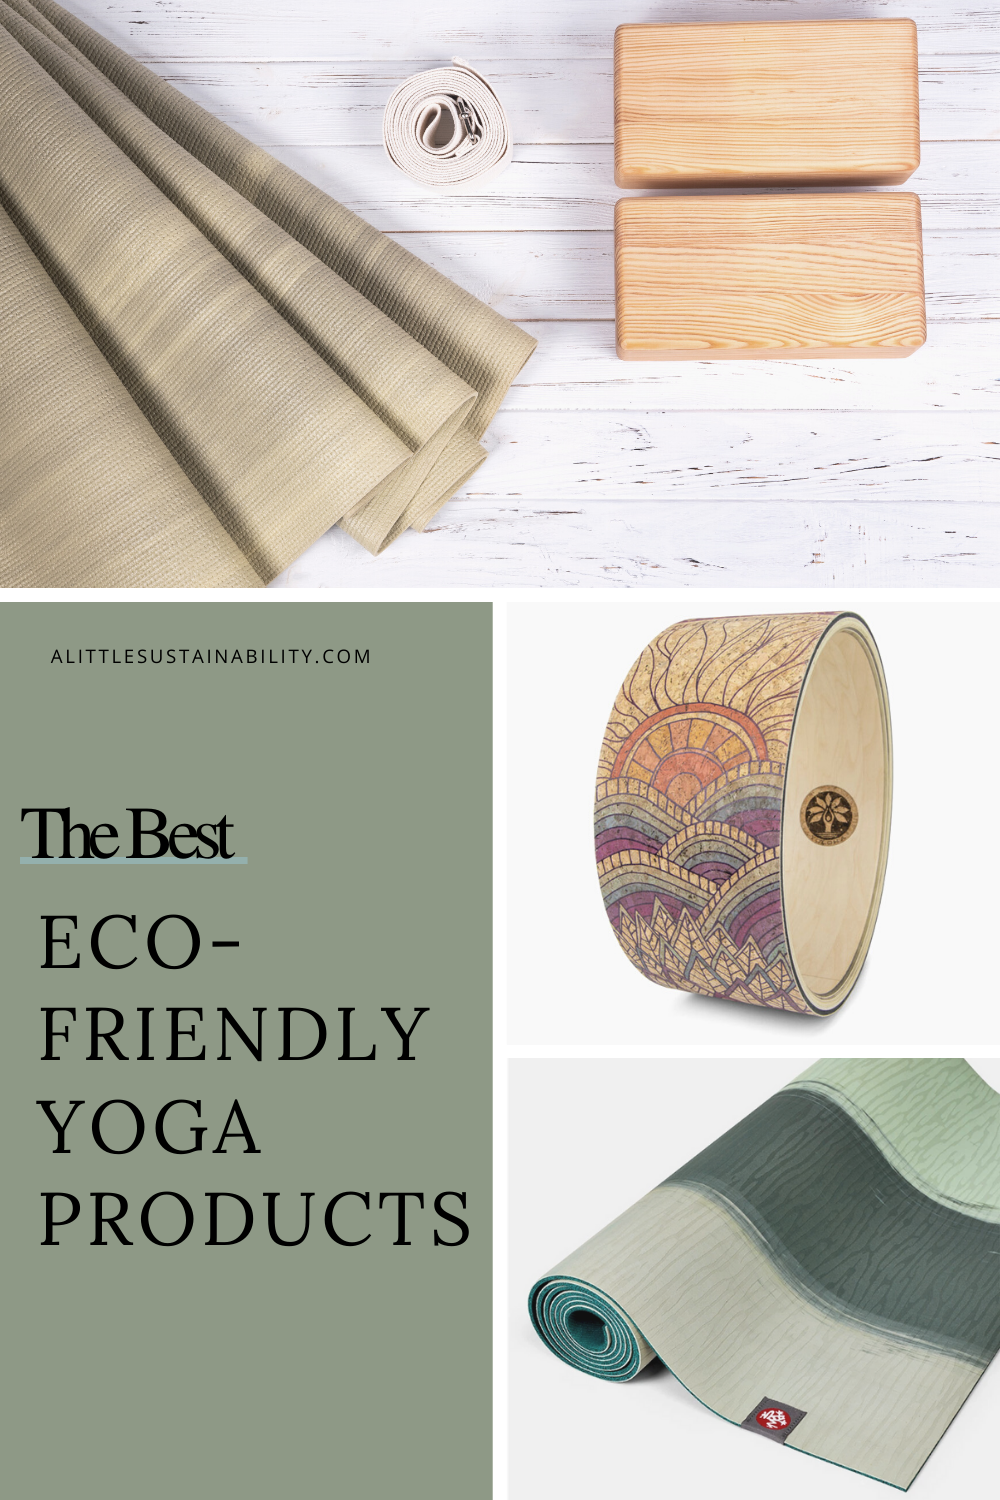 the best eco-friendly yoga products. Low waste yoga props, from organic yoga bolsters & straps, to cork yoga mats, blocks, and yoga wheels.